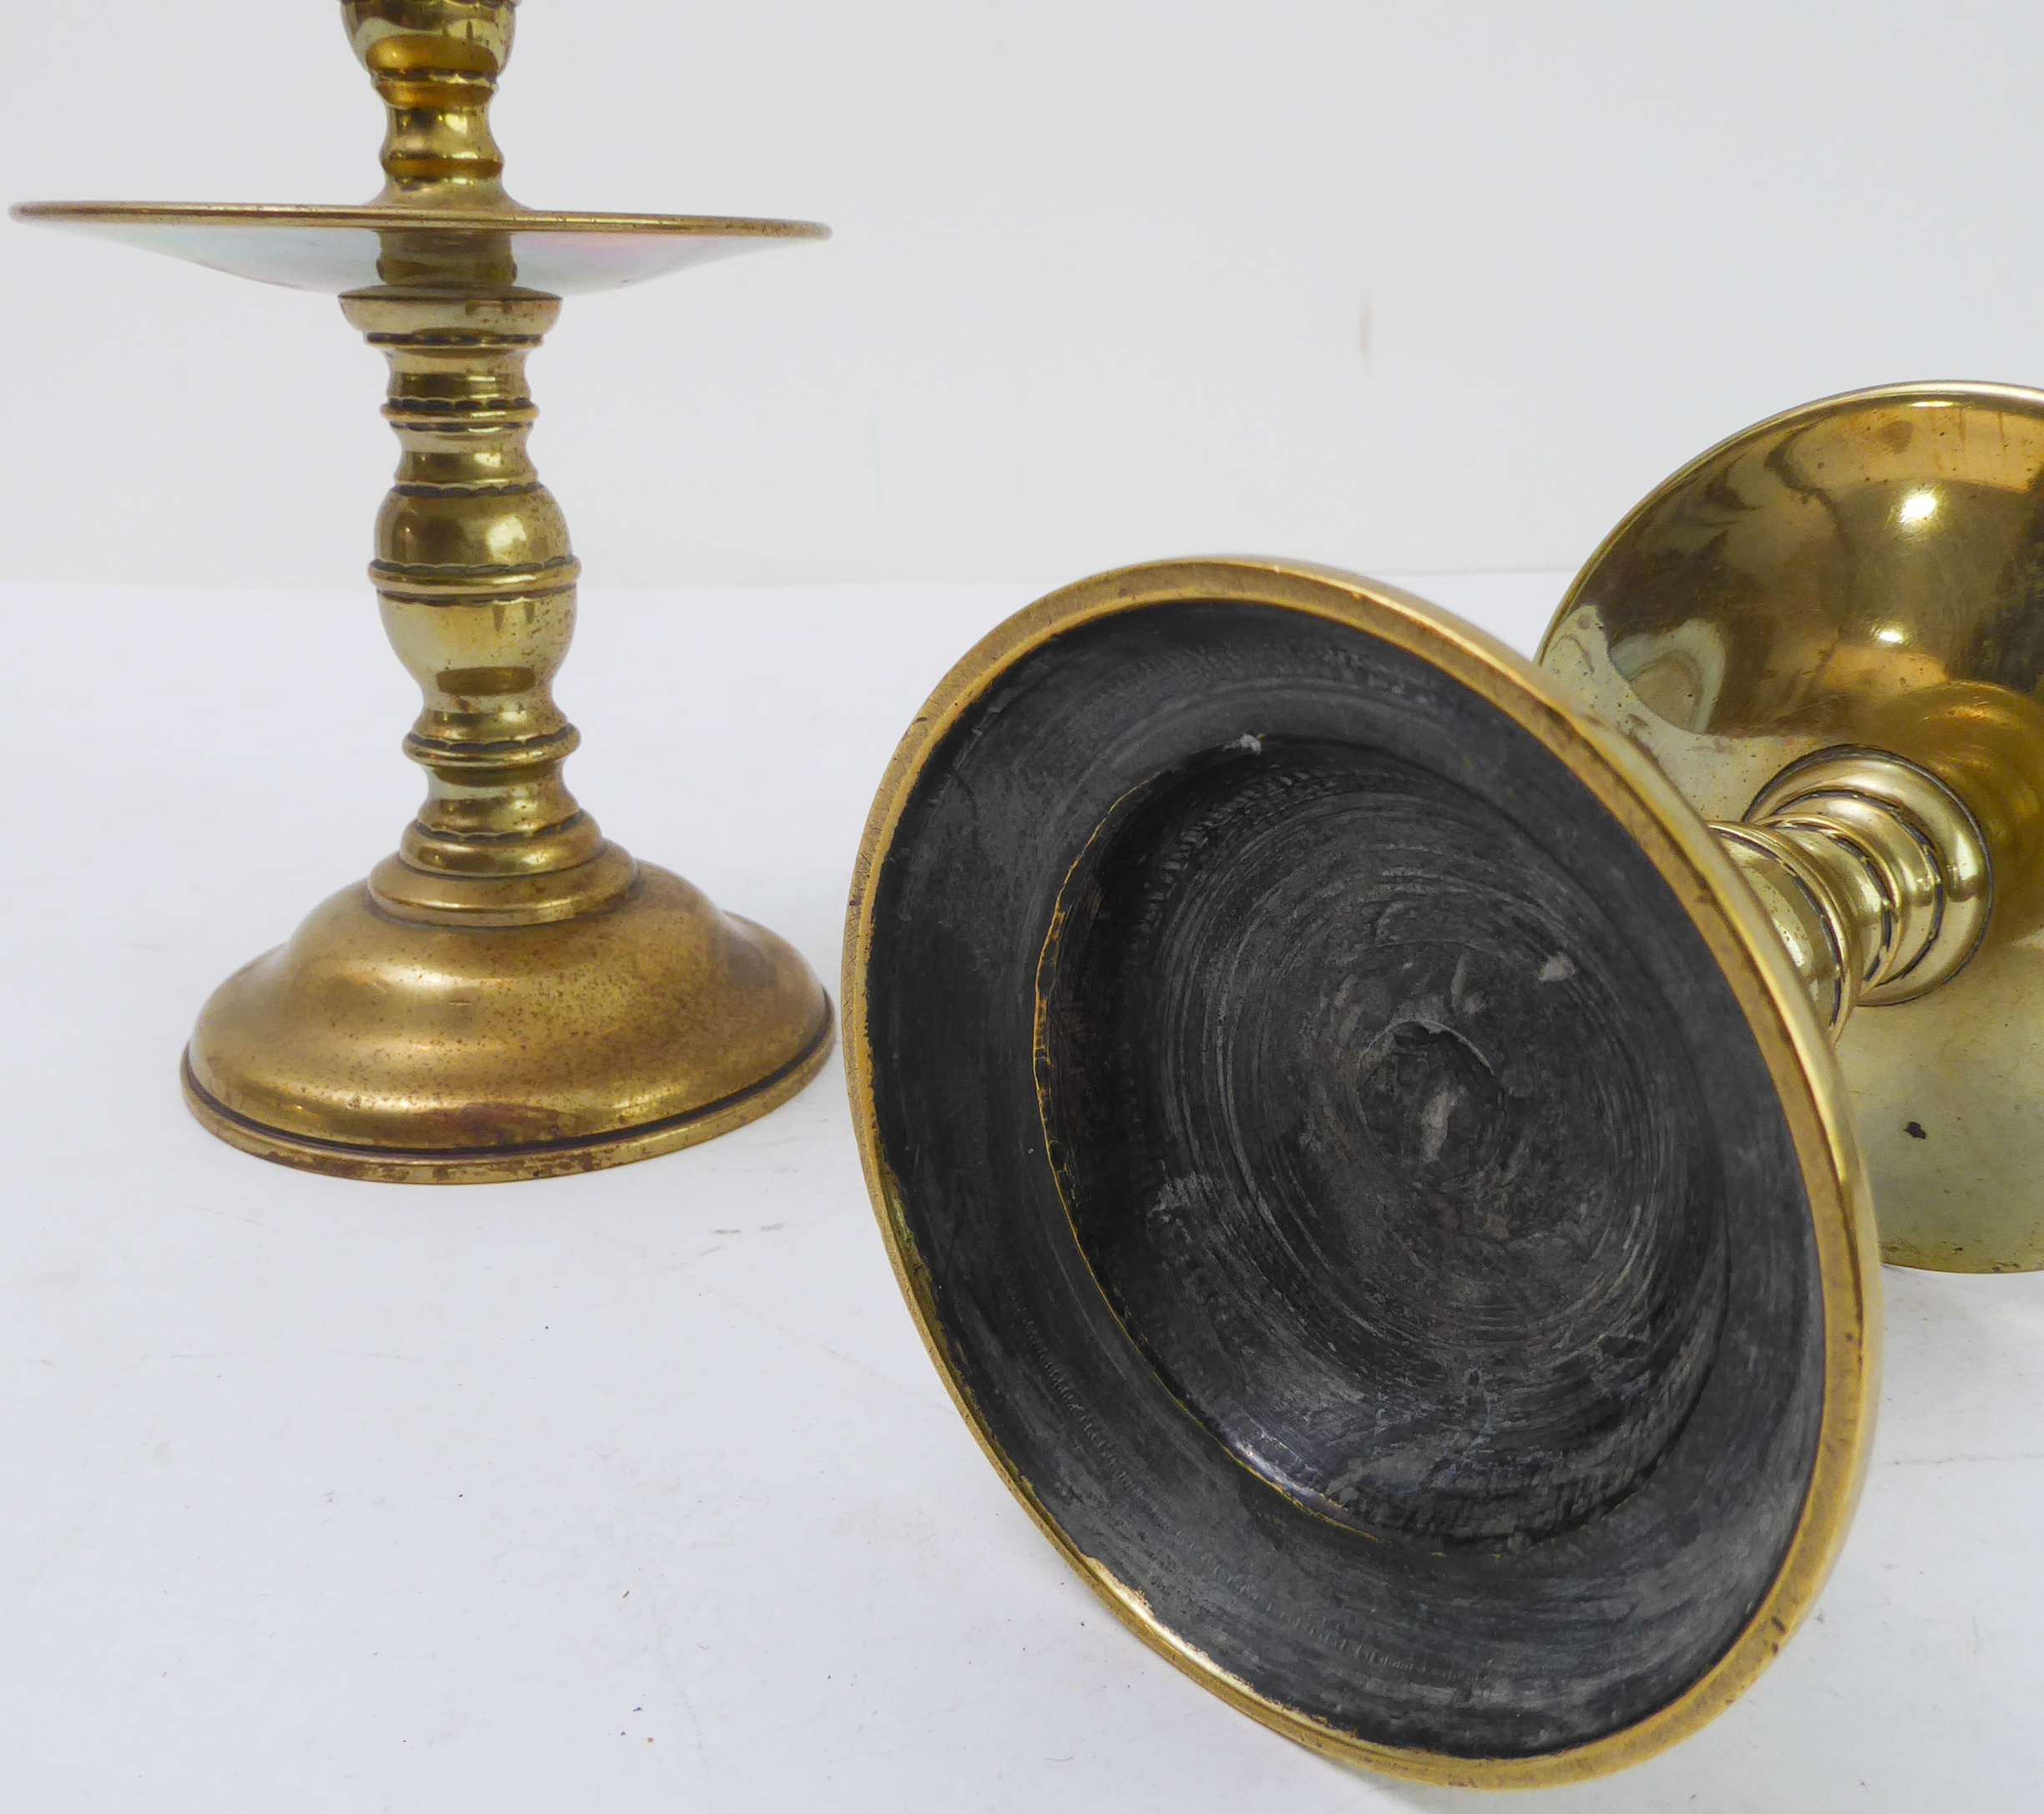 A pair of Dutch brass Heemskirk candlesticks (probably 19th century) in 17th century style) (18.5 cm - Image 2 of 3